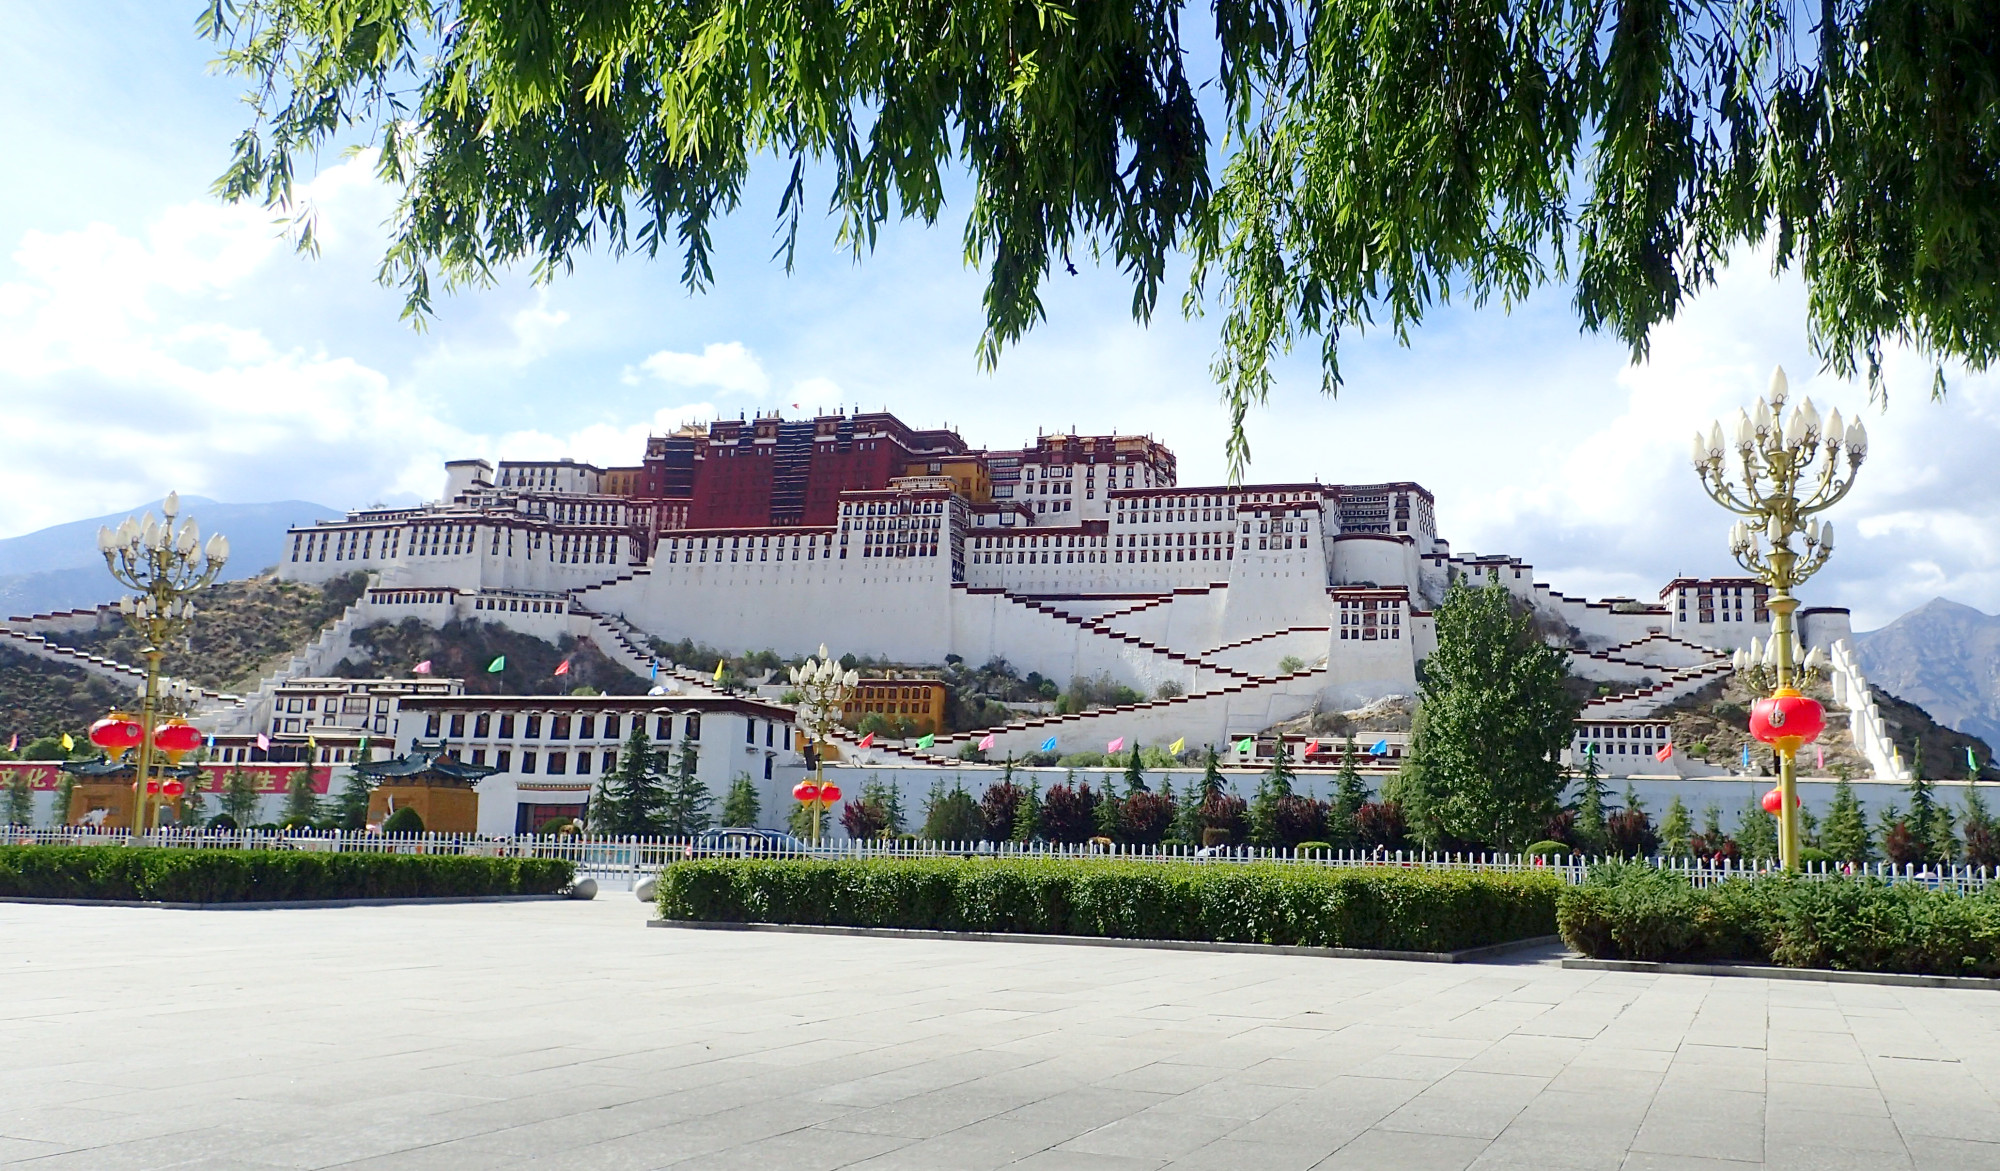 Potala Palace in Lhasa, Tibet. Former residence of Dalai Lamas who were the living Gods in Tibetan Buddhism.